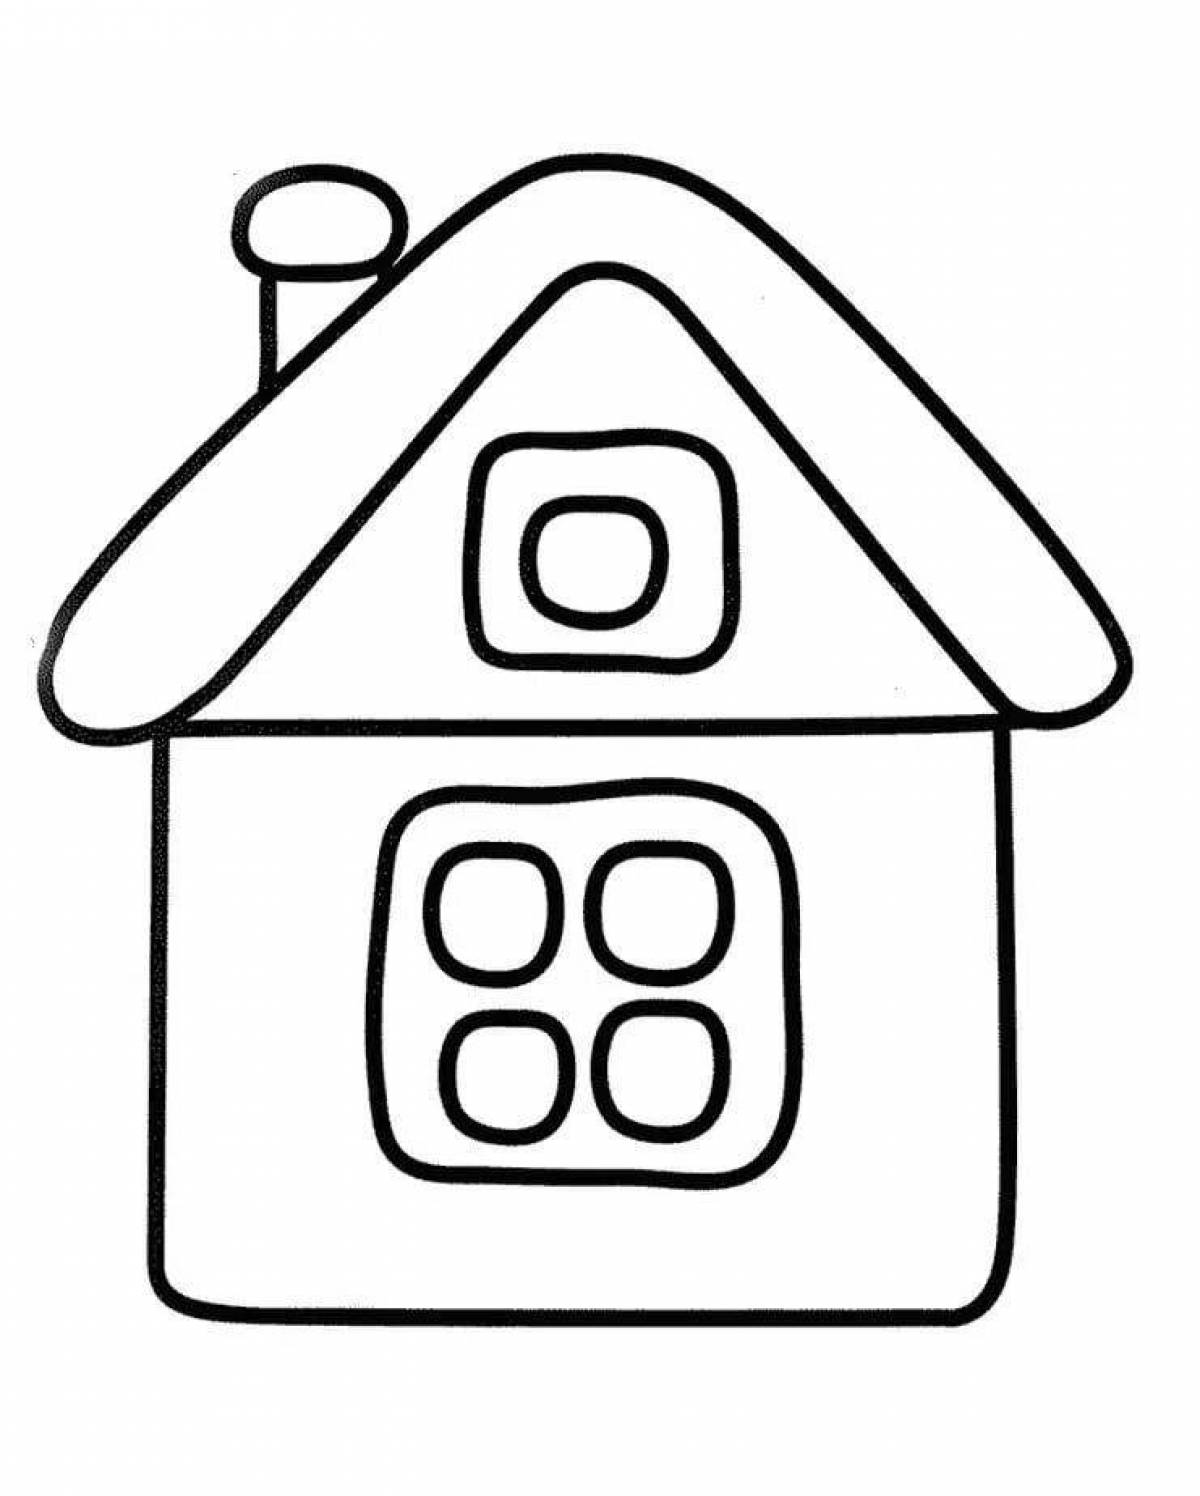 Coloring cute simple house